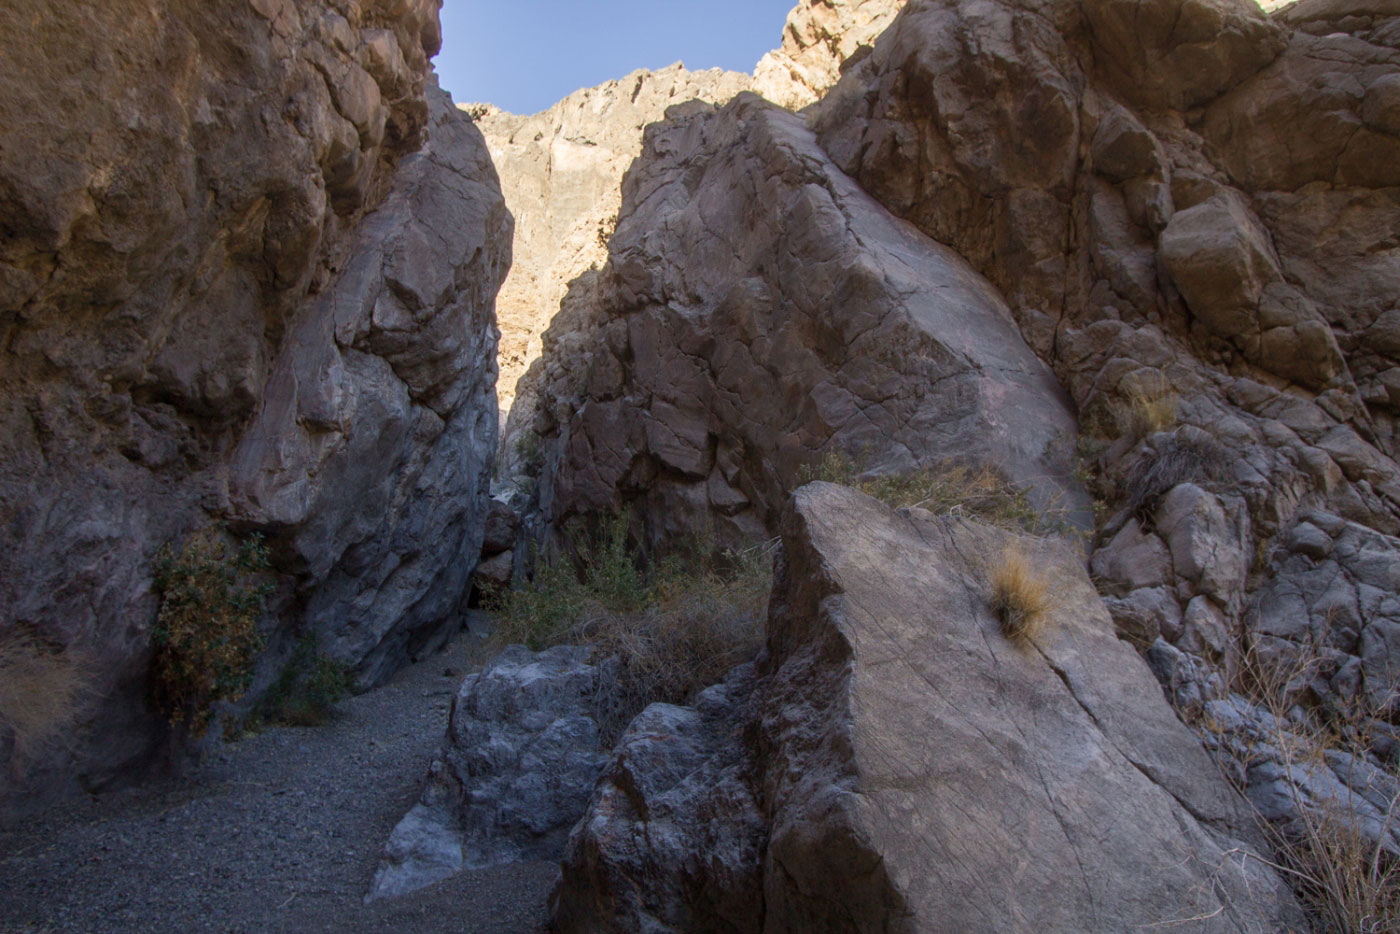 Hike Slit Canyon in Death Valley National Park, California - Stav is Lost